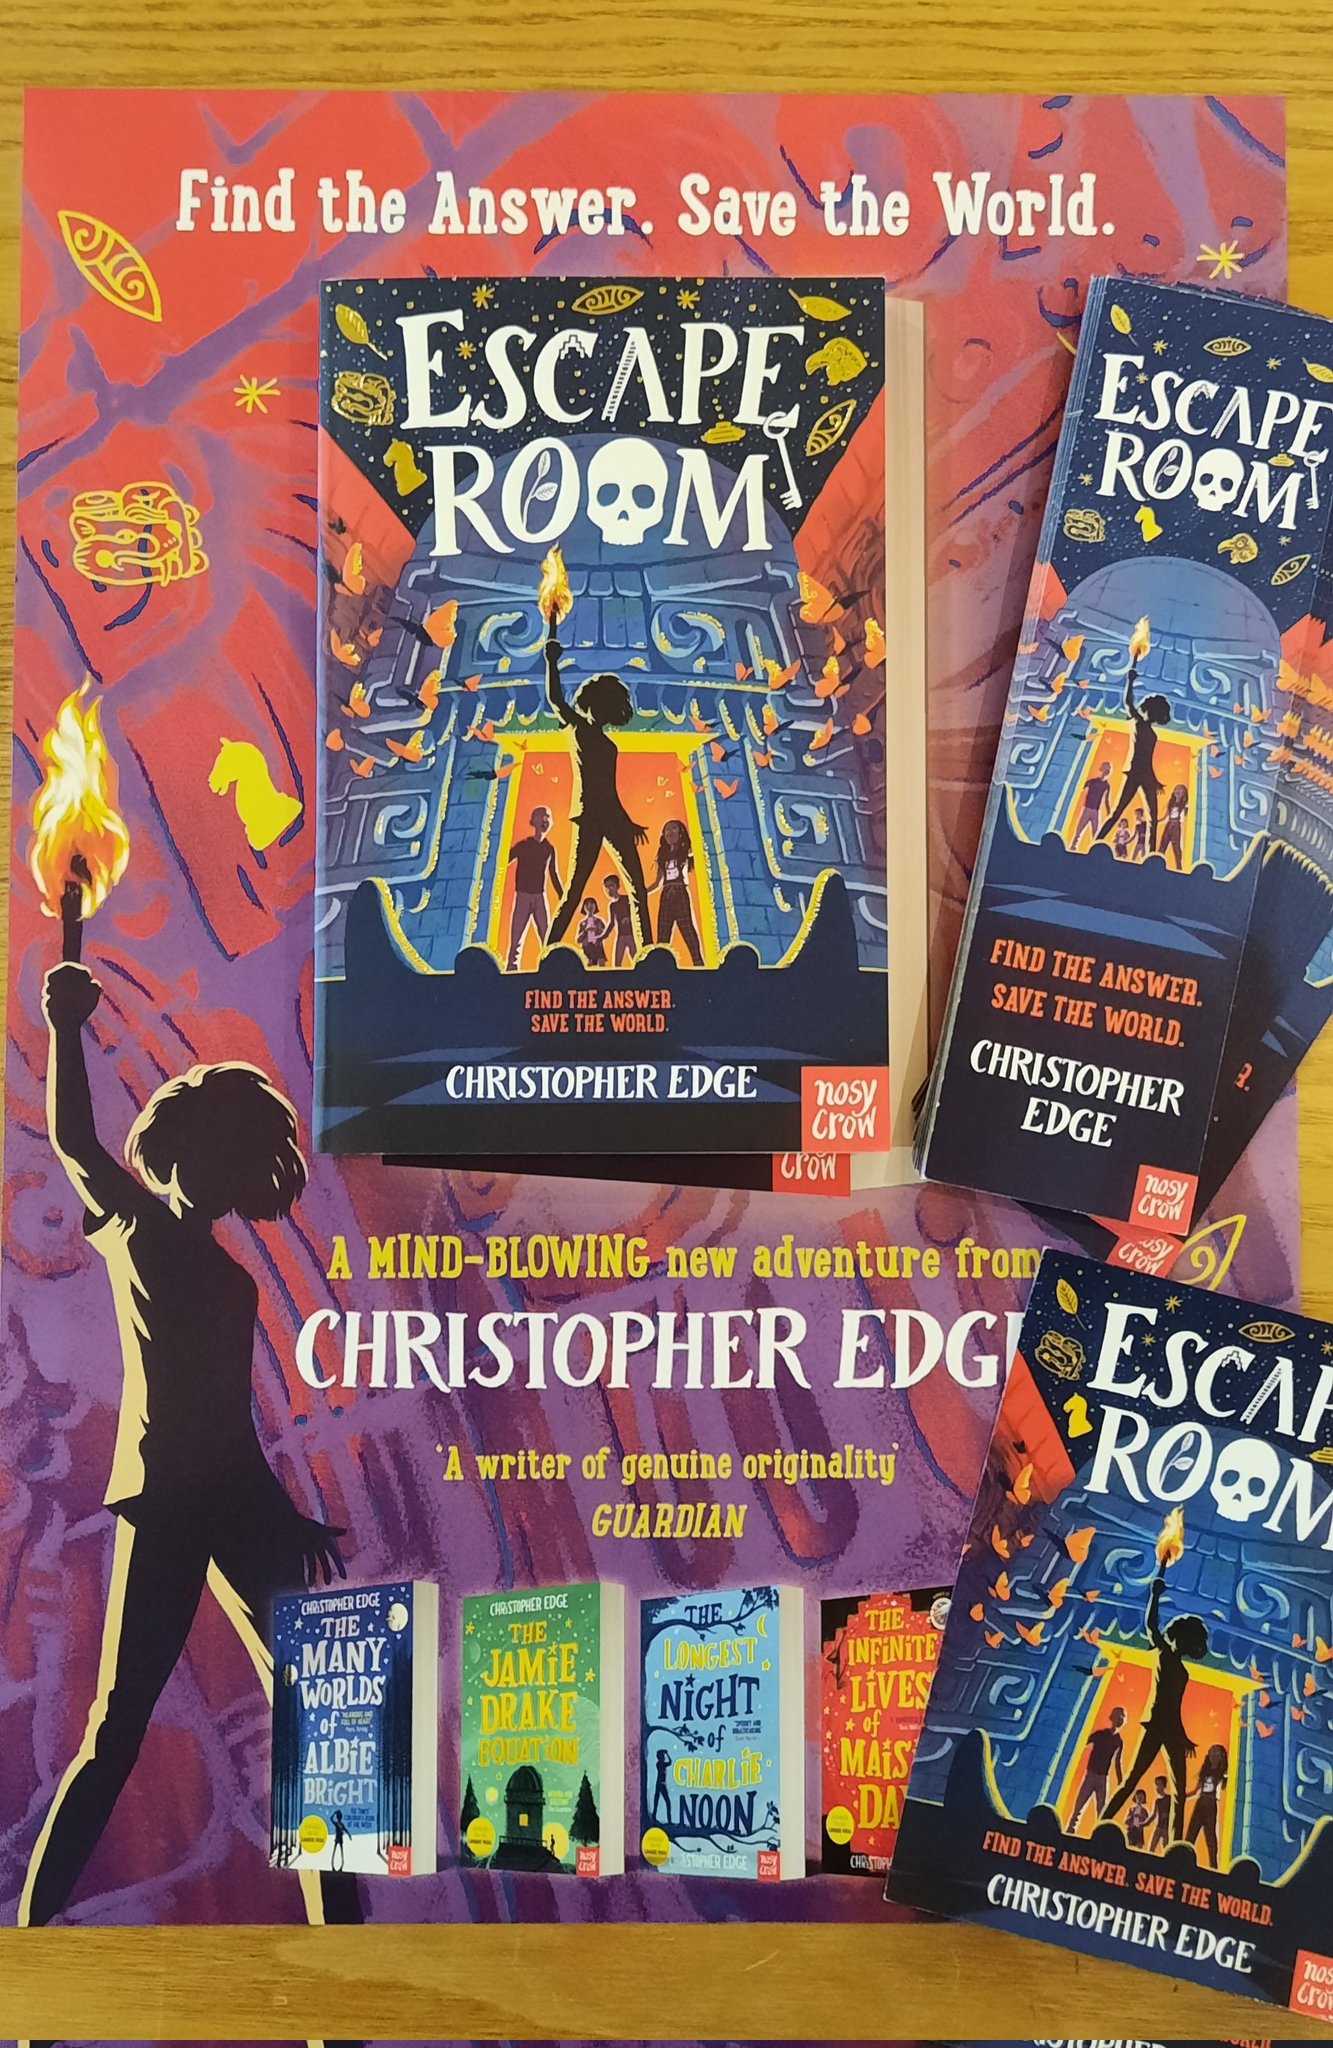 Escape Room by Christopher Edge